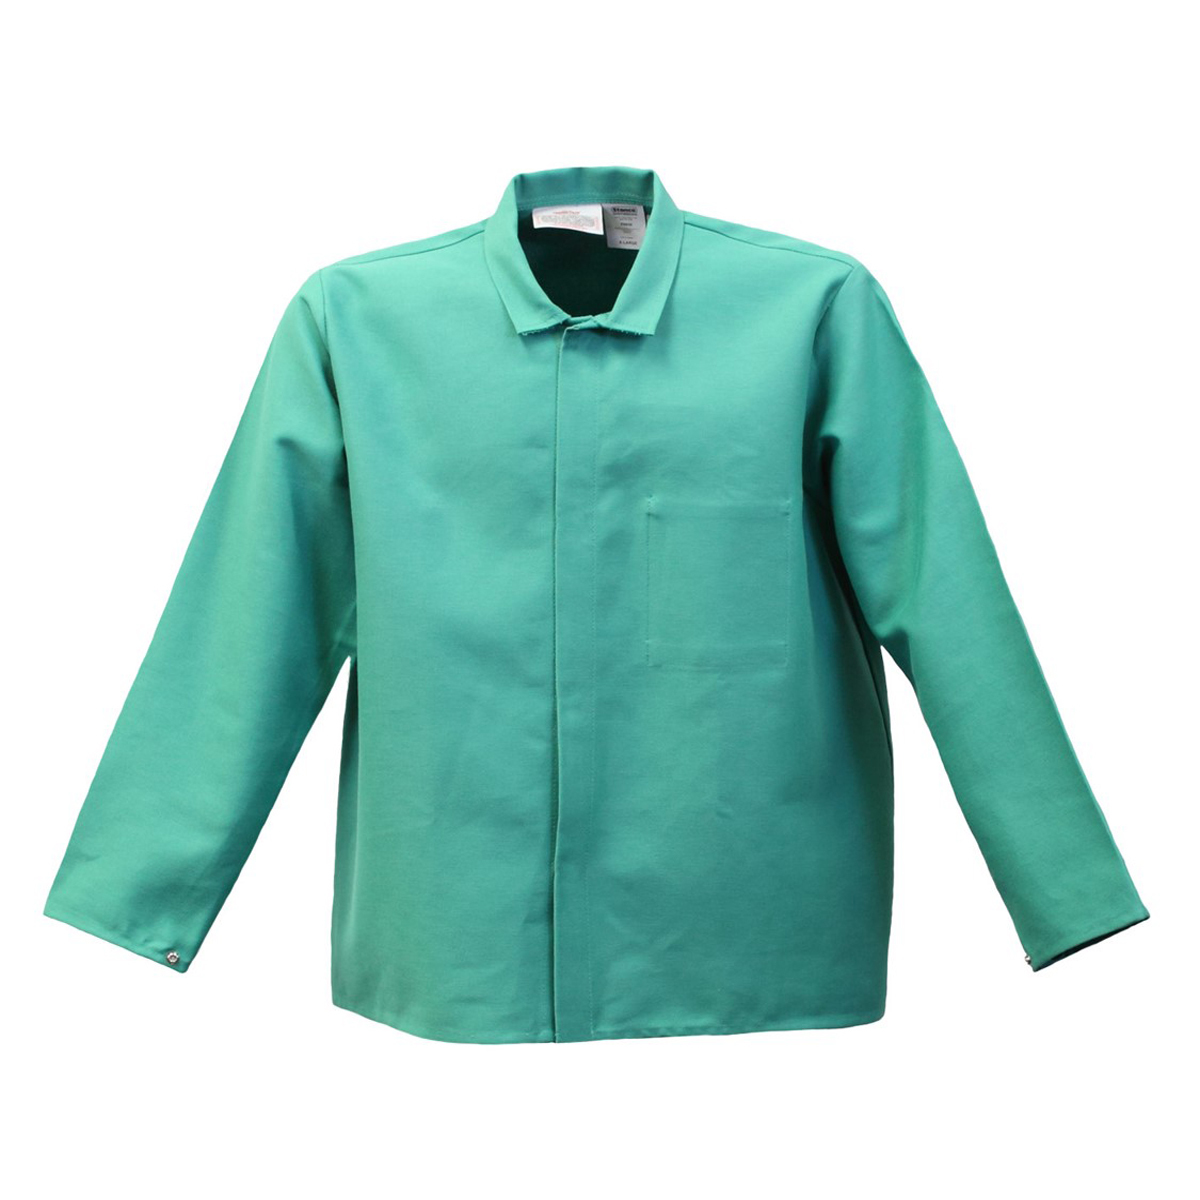 Stanco Safety Products™ Large Green Cotton Flame Resistant Welding Jacket With Hook And Loop Closure And 2